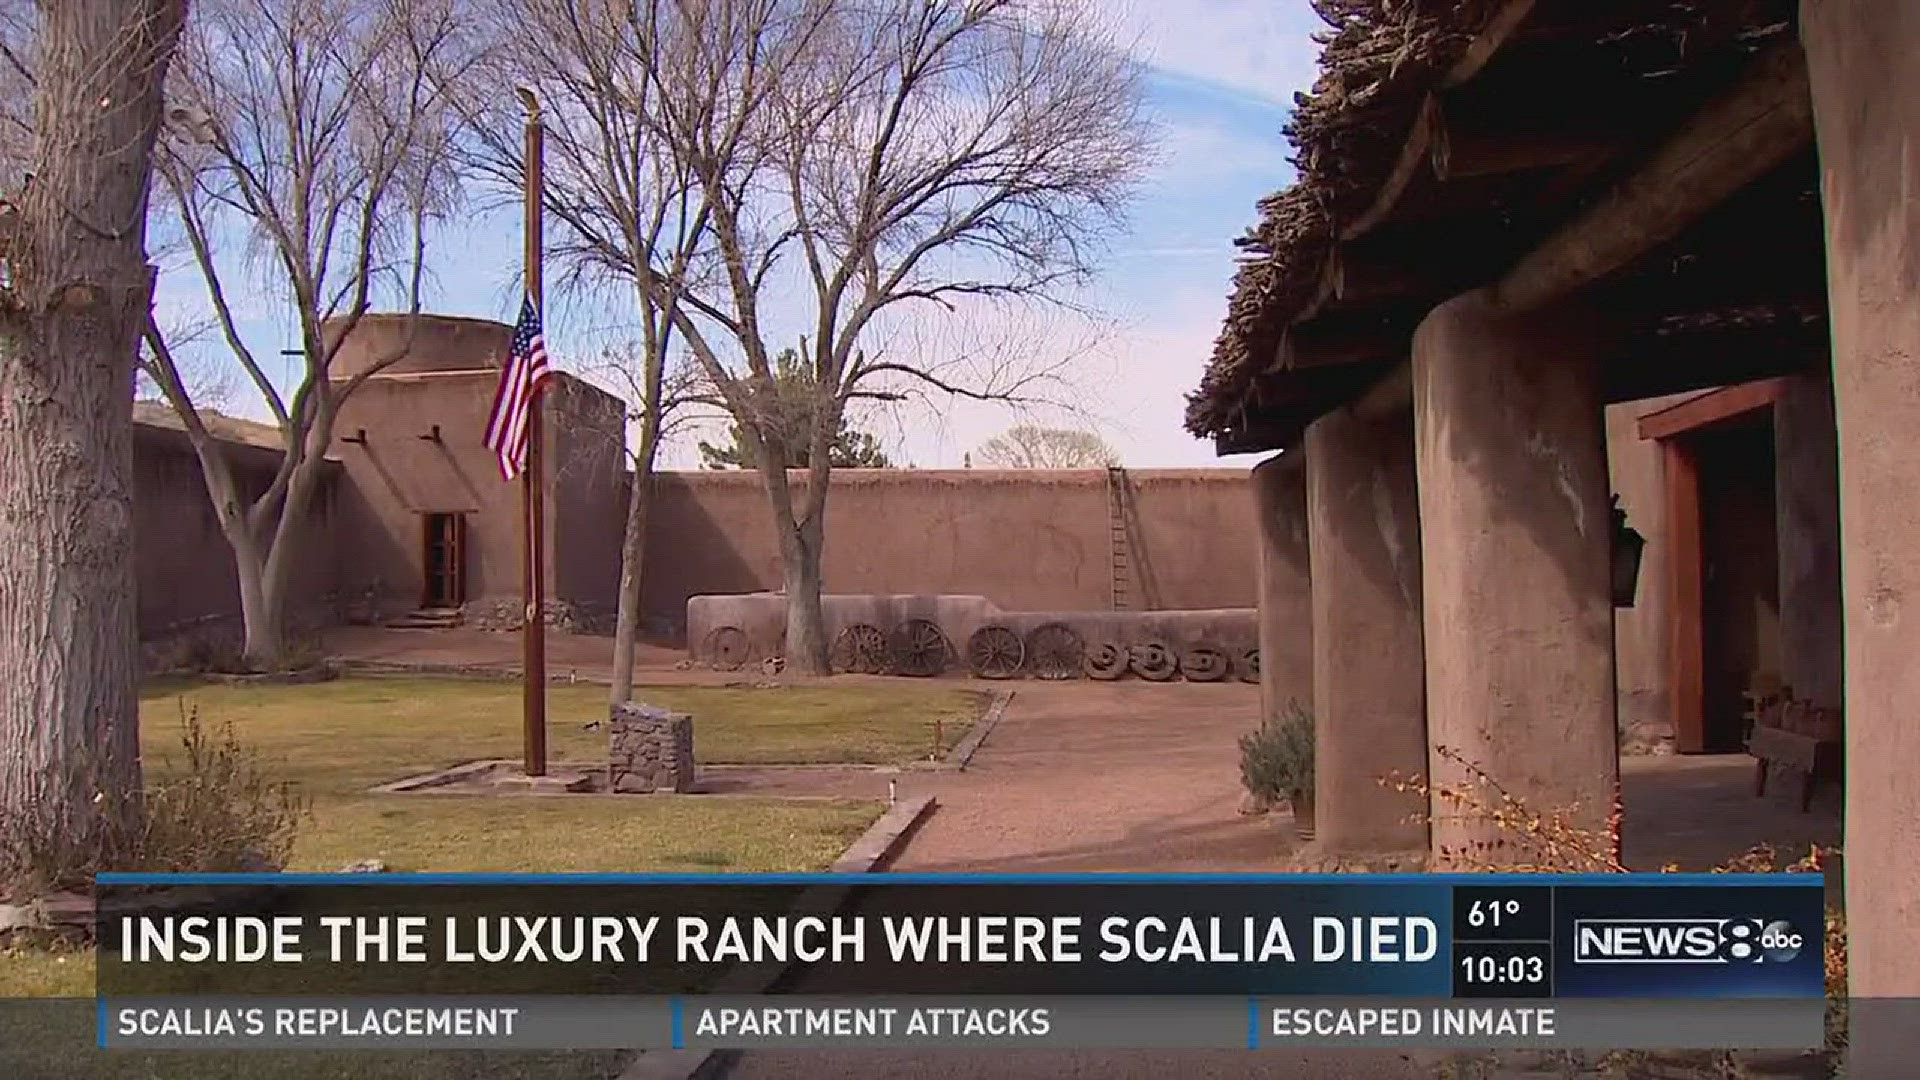 The curtains were pulled at the Cibolo Creek Ranch, where Justice Antonin Scalia was found dead Saturday. Jason Whitely reports.